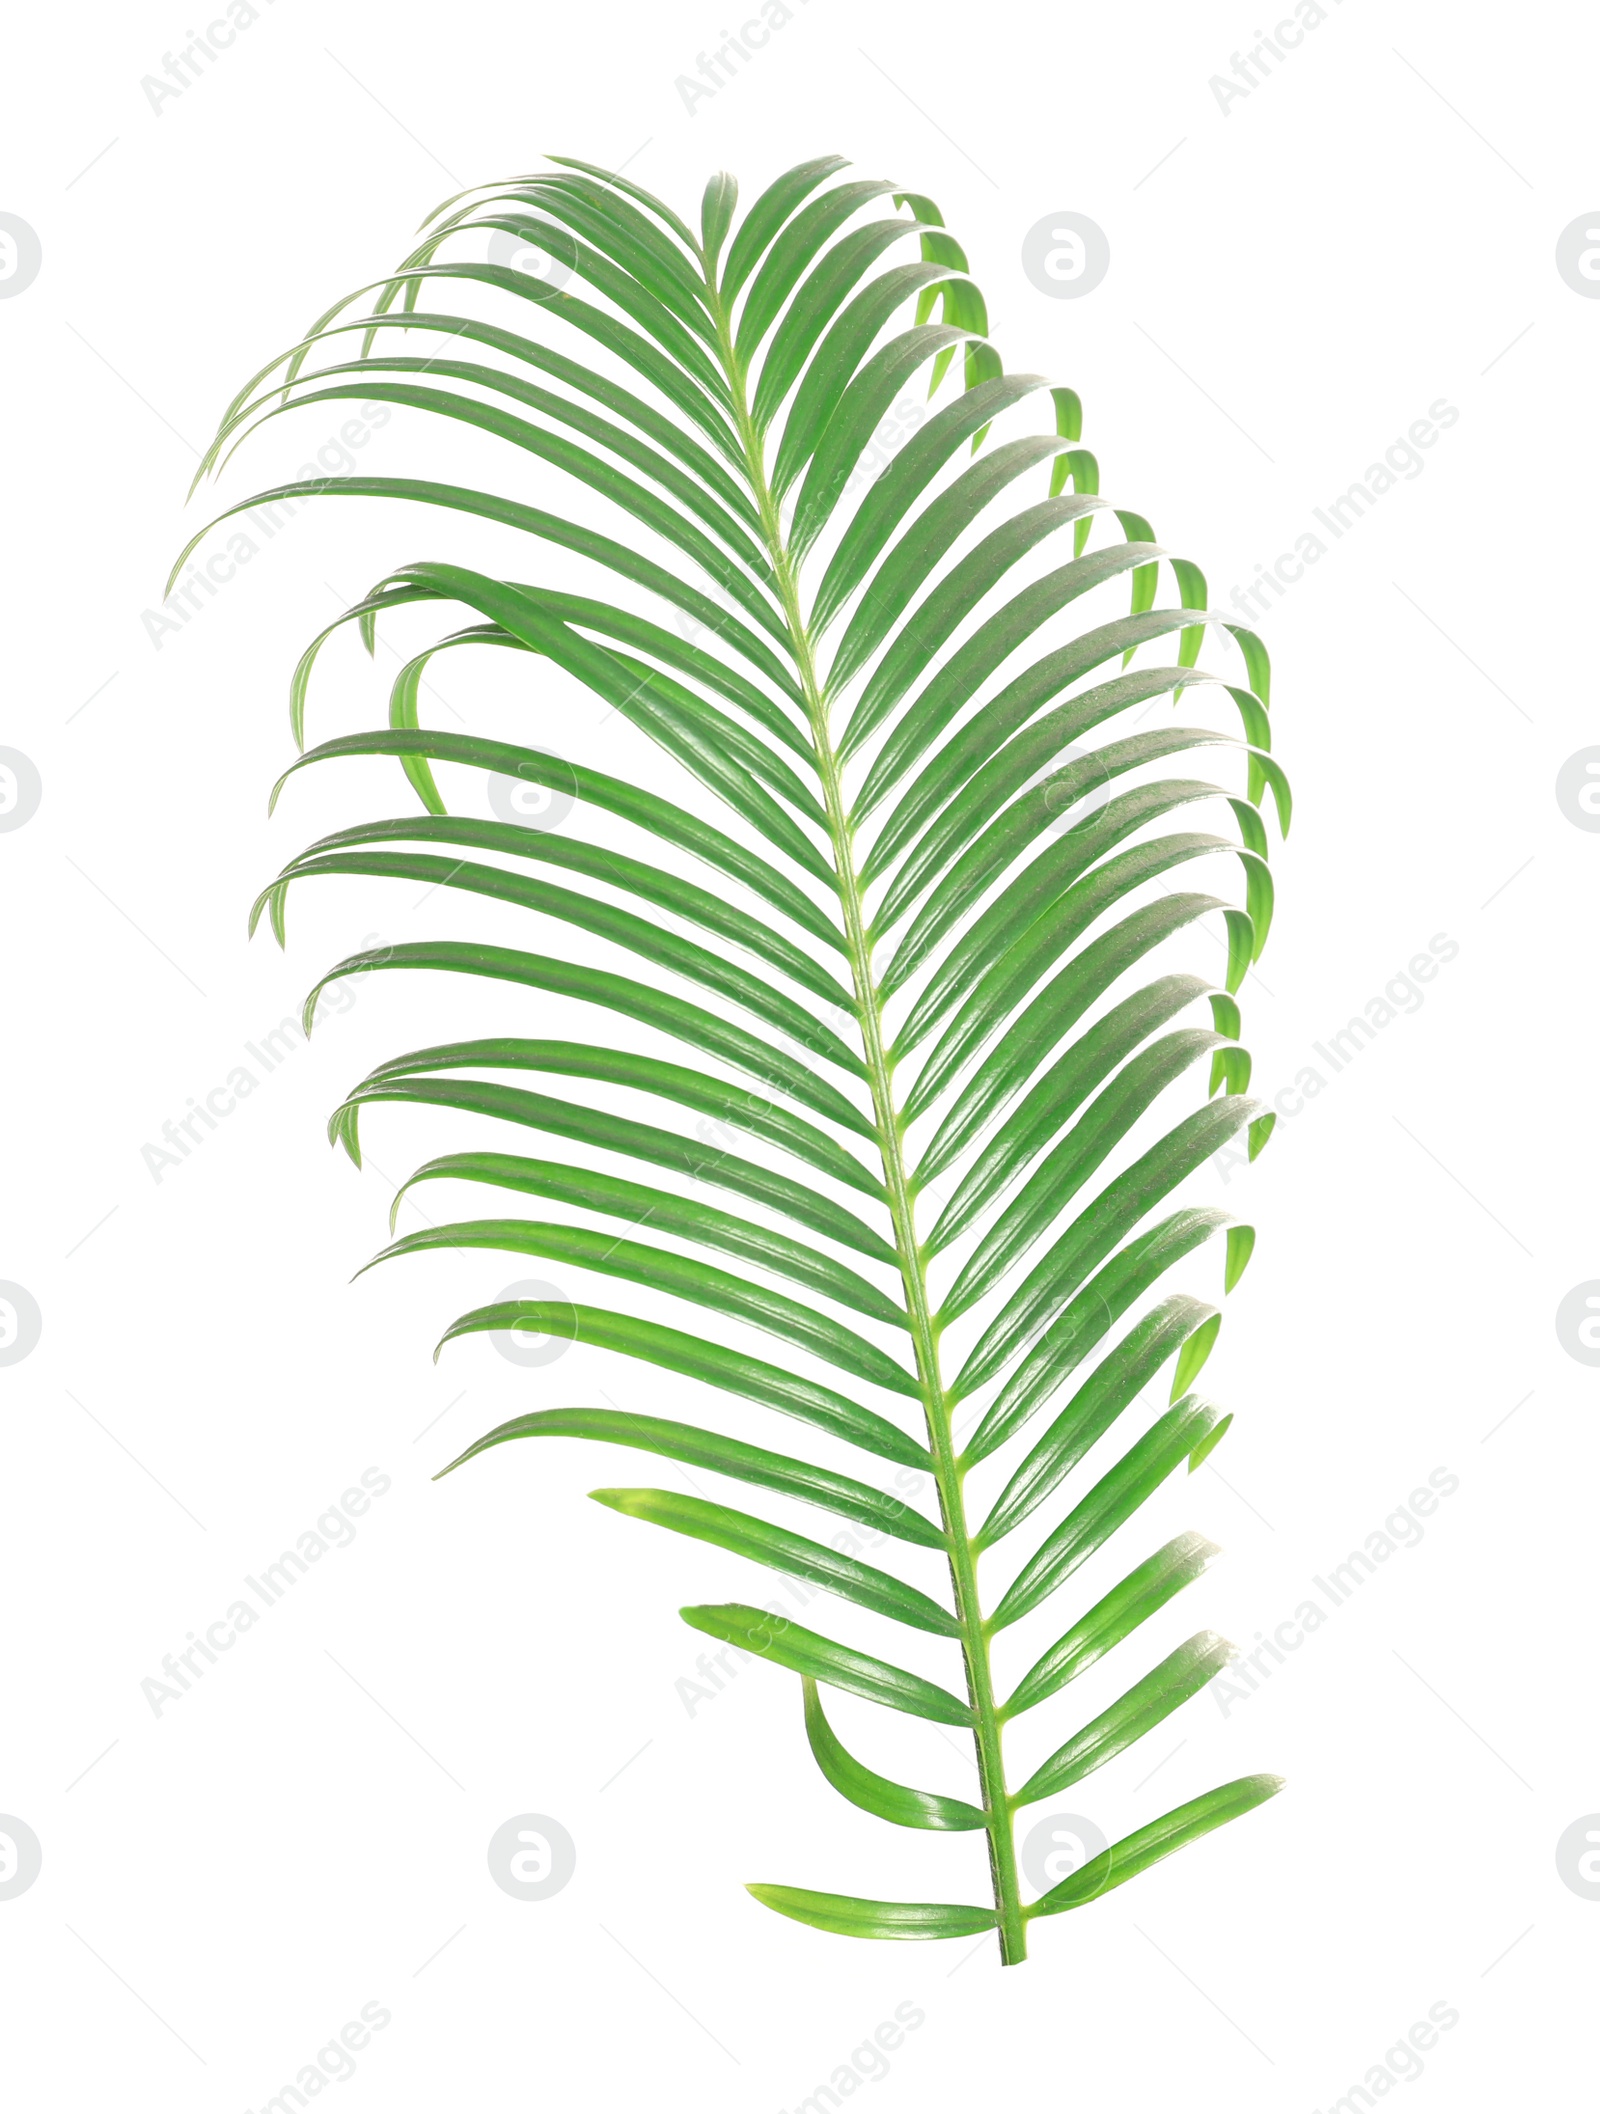 Photo of Tropical sago palm tree leaf isolated on white